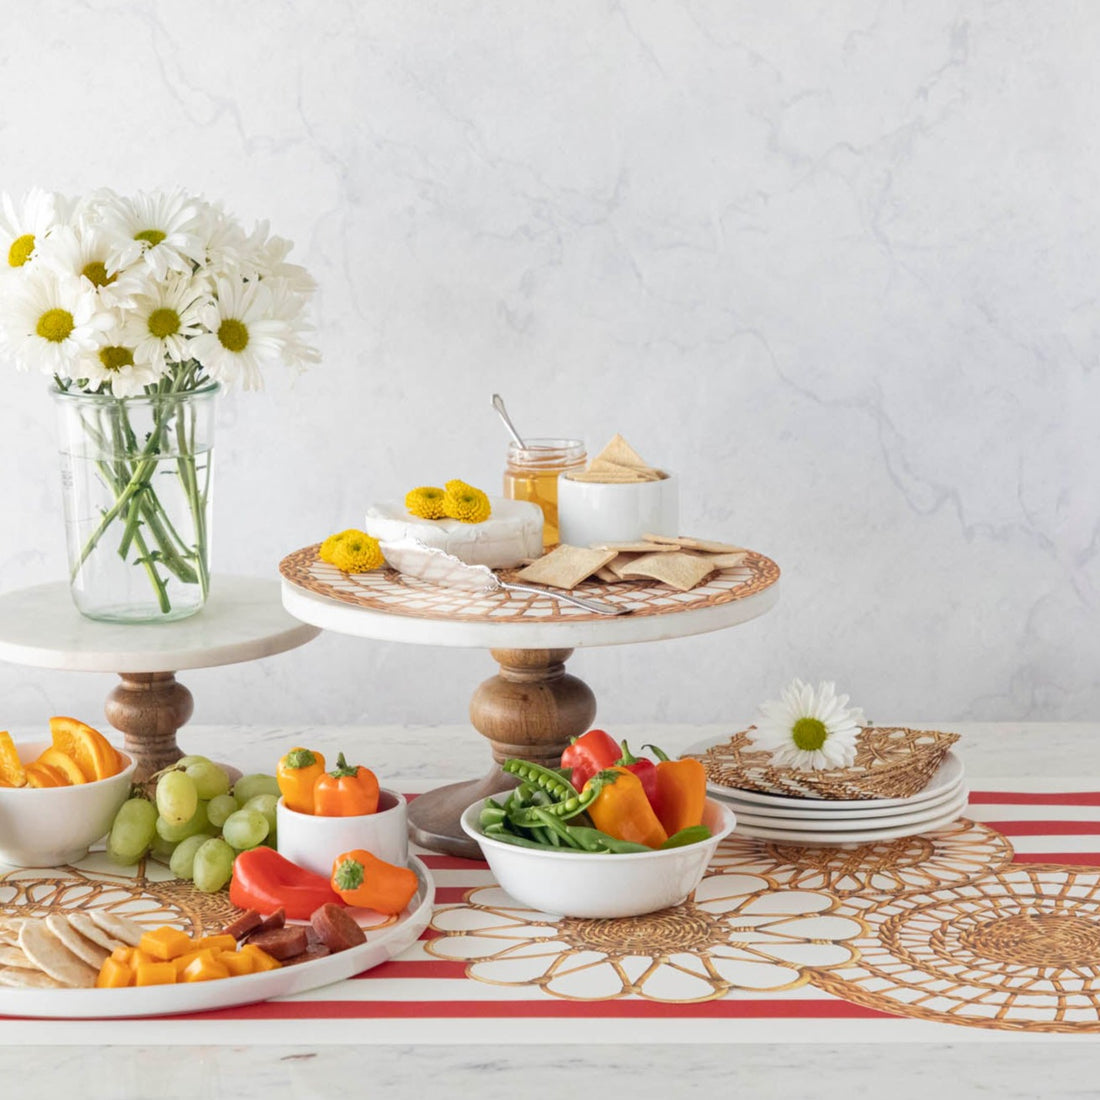 An elegant charcuterie spread with cake stands and a vase of flowers, featuring Rattan Weave Serving Papers.